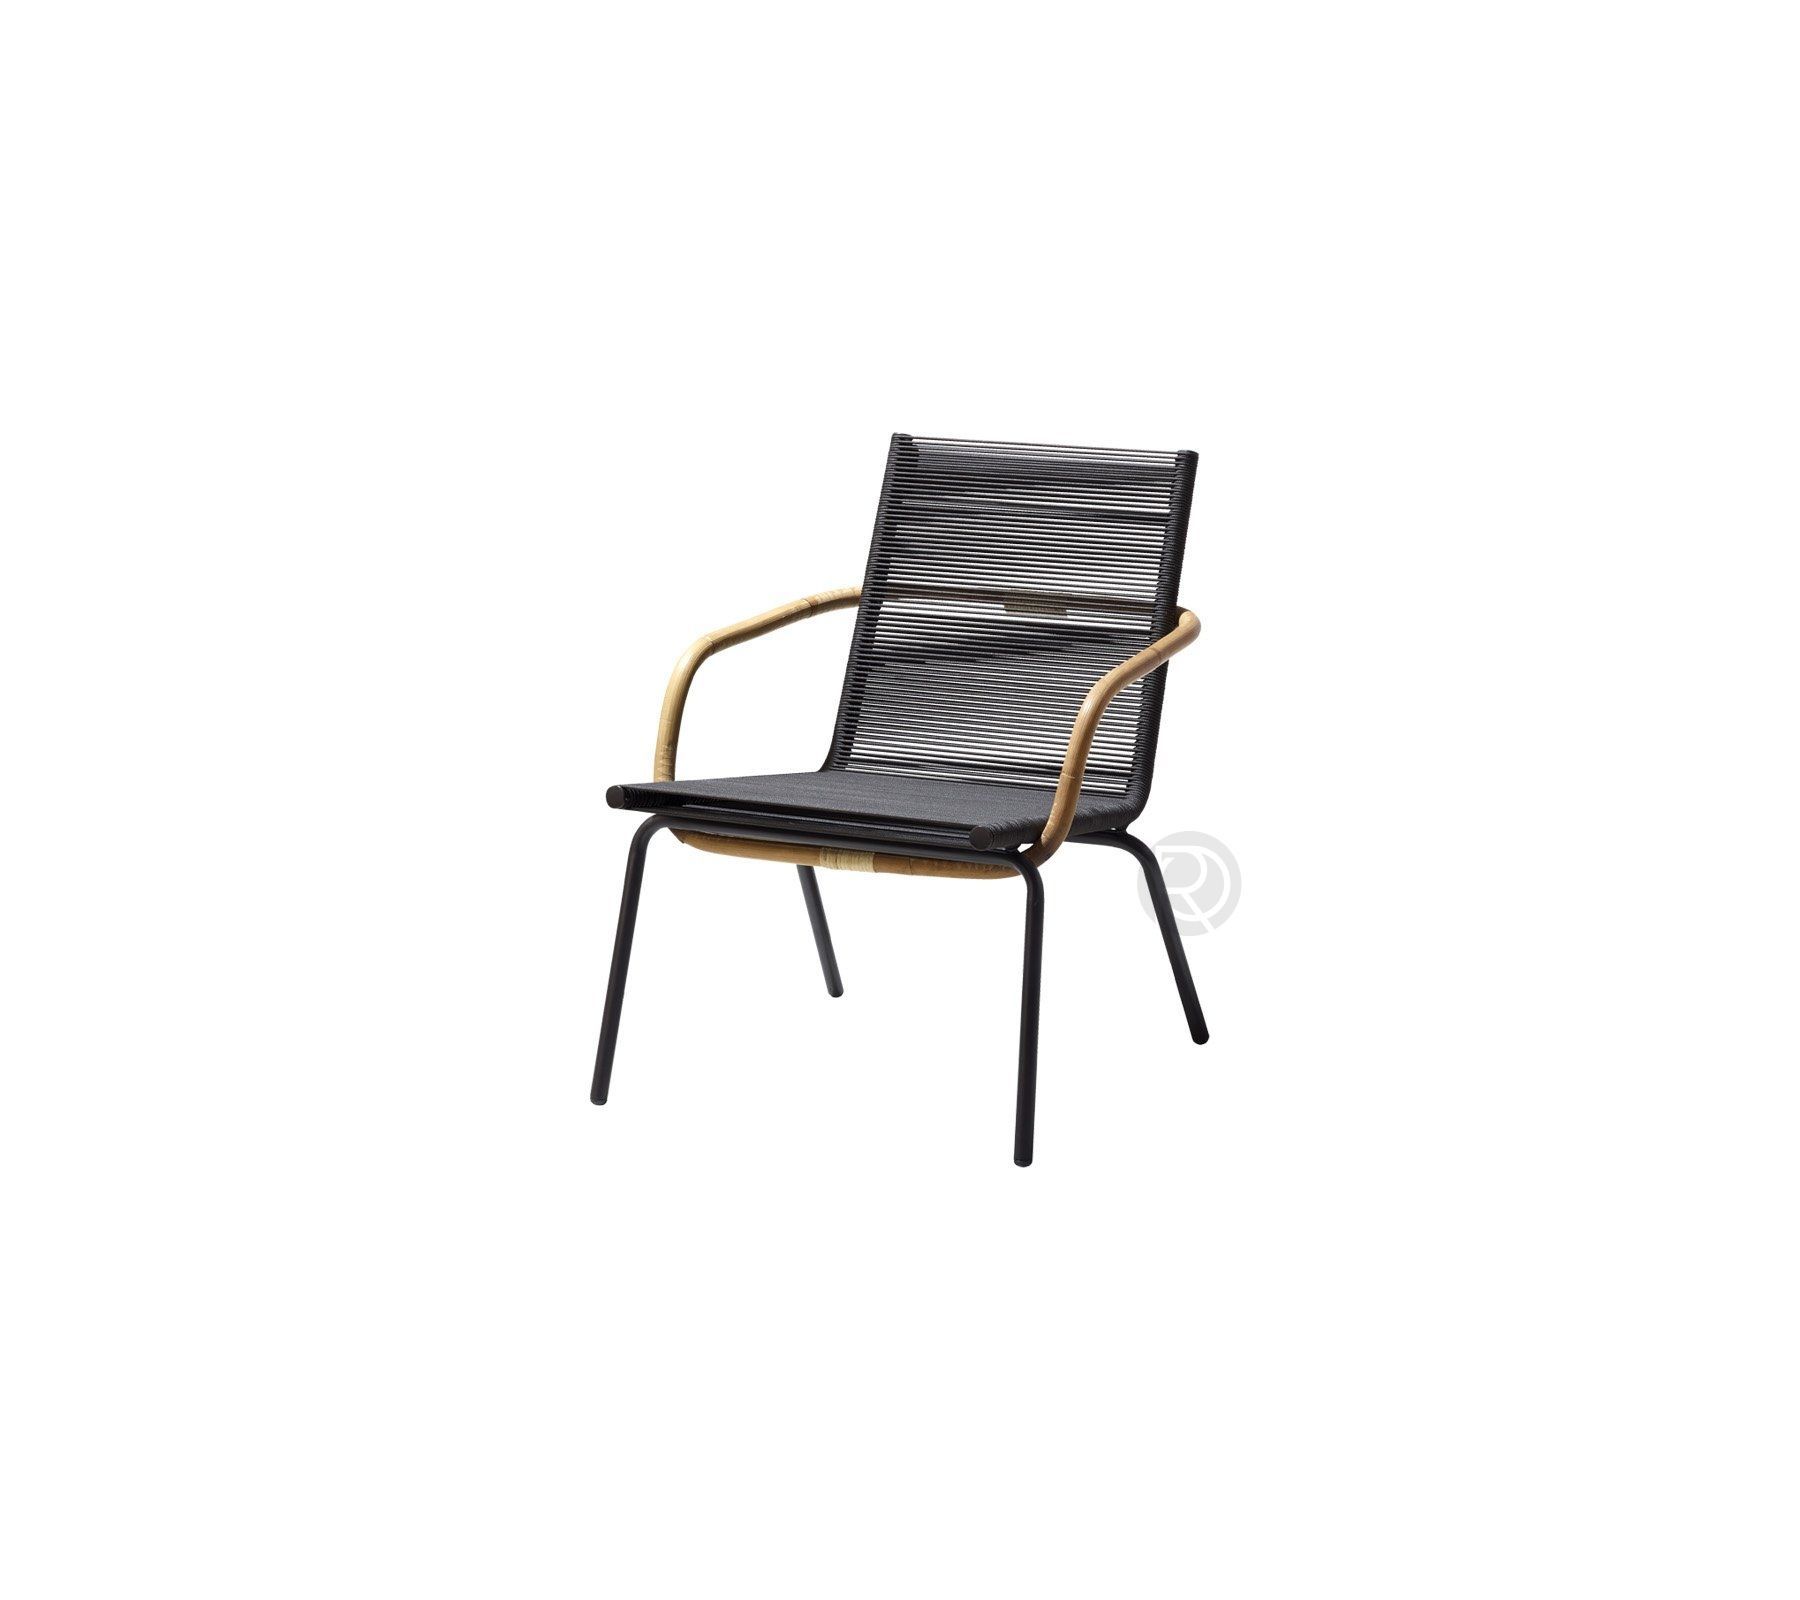 SIDD by Cane-Line chair